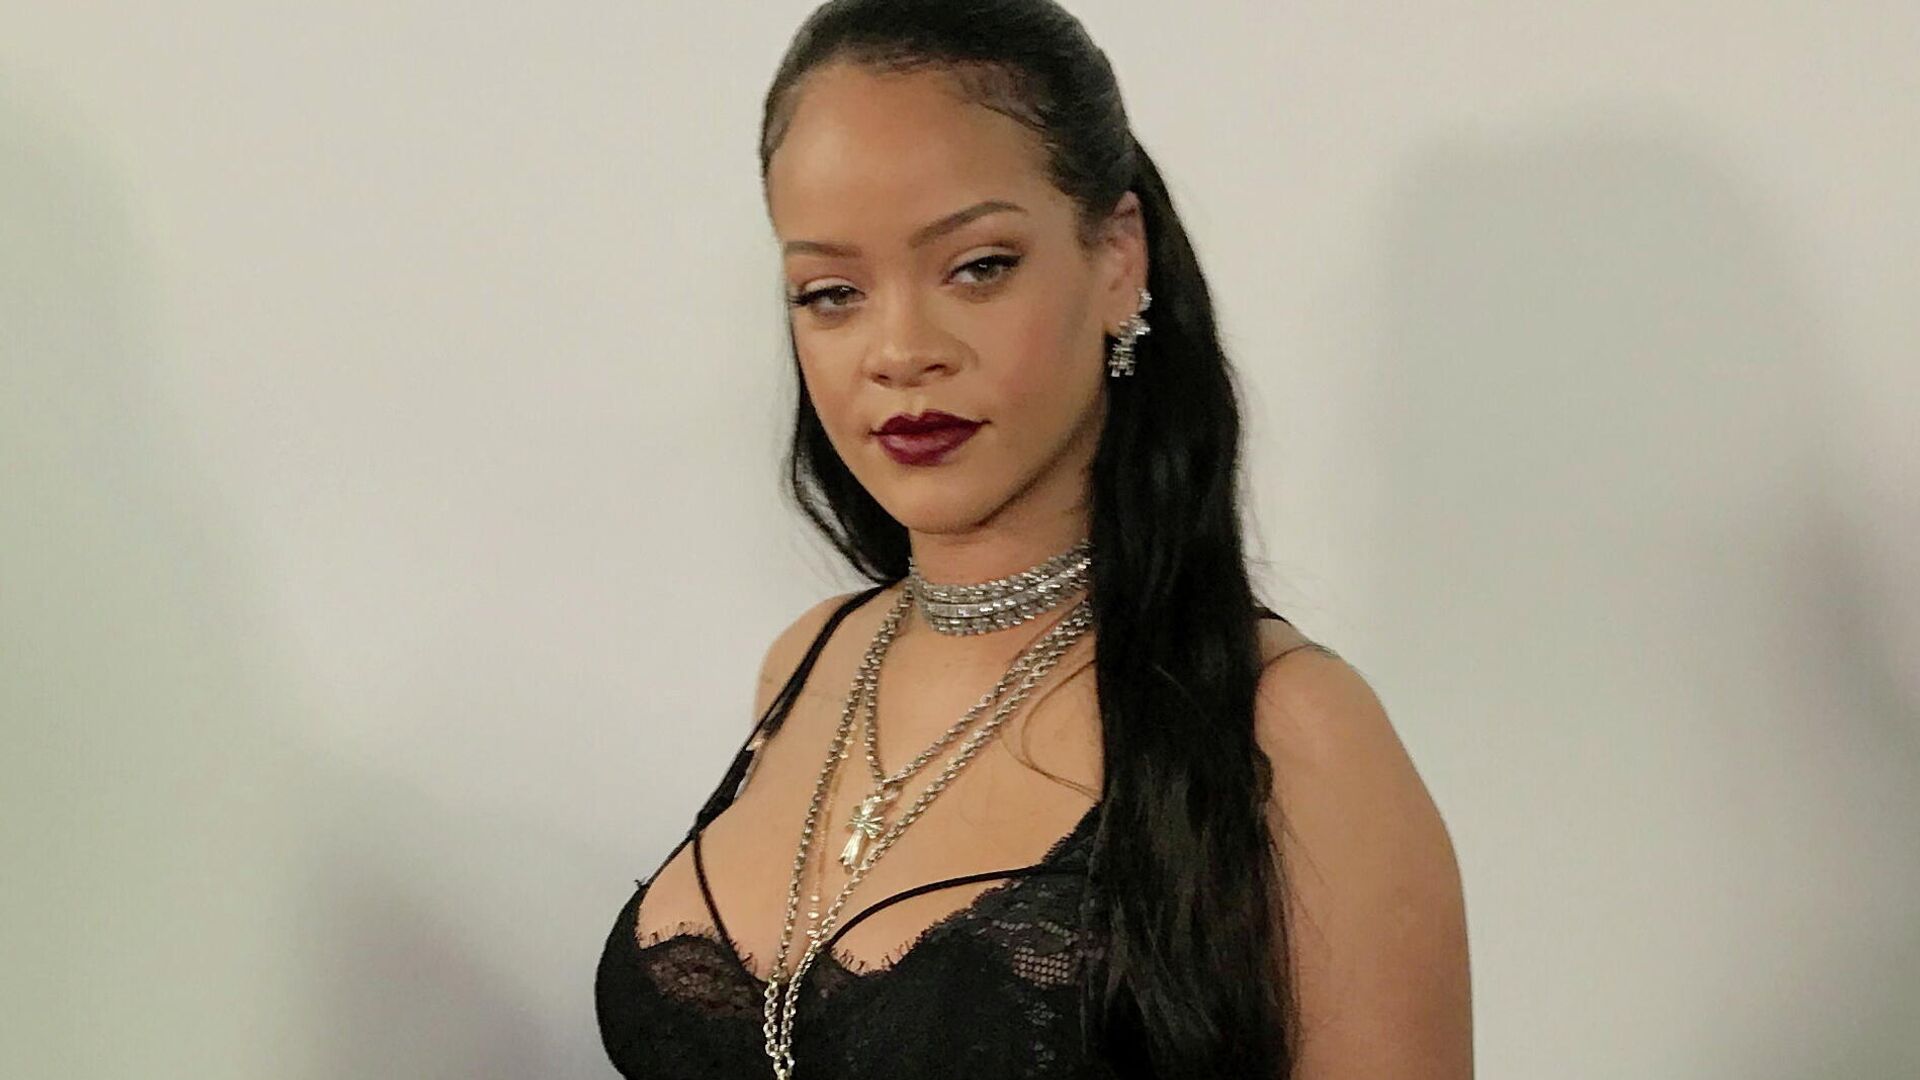 Singer Rihanna, who is pregnant, leaves after the Dior Fall-Winter 2022/2023 Women's ready-to-wear collection show during Paris Fashion Week in Paris, France, March 1, 2022 - Sputnik International, 1920, 02.03.2022